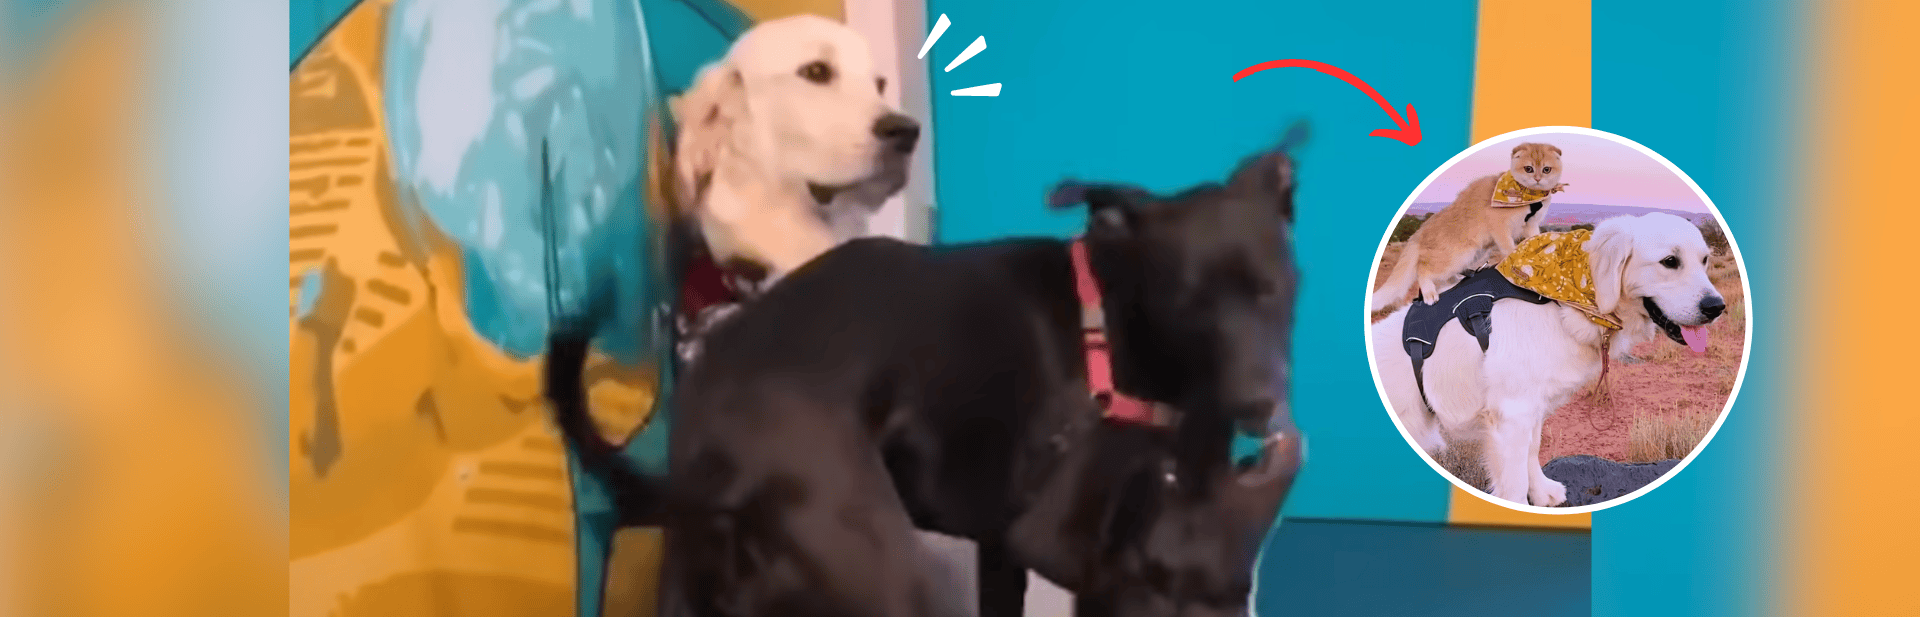 Once Shy Service Dog Finds His Joyful Spark with the Help of a Cuddly Kitten Sidekick